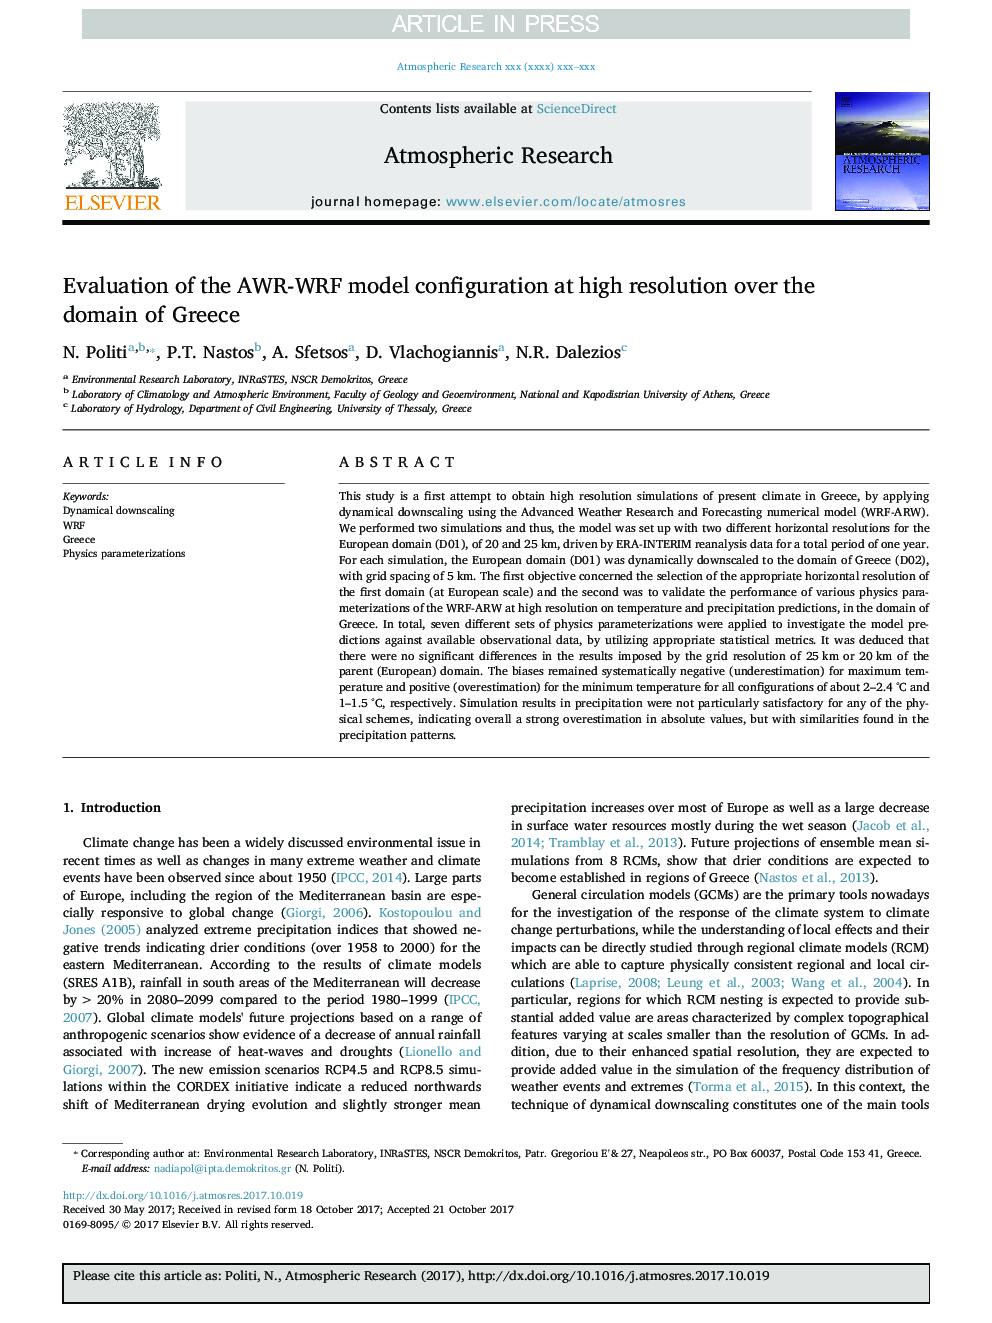 Evaluation of the AWR-WRF model configuration at high resolution over the domain of Greece